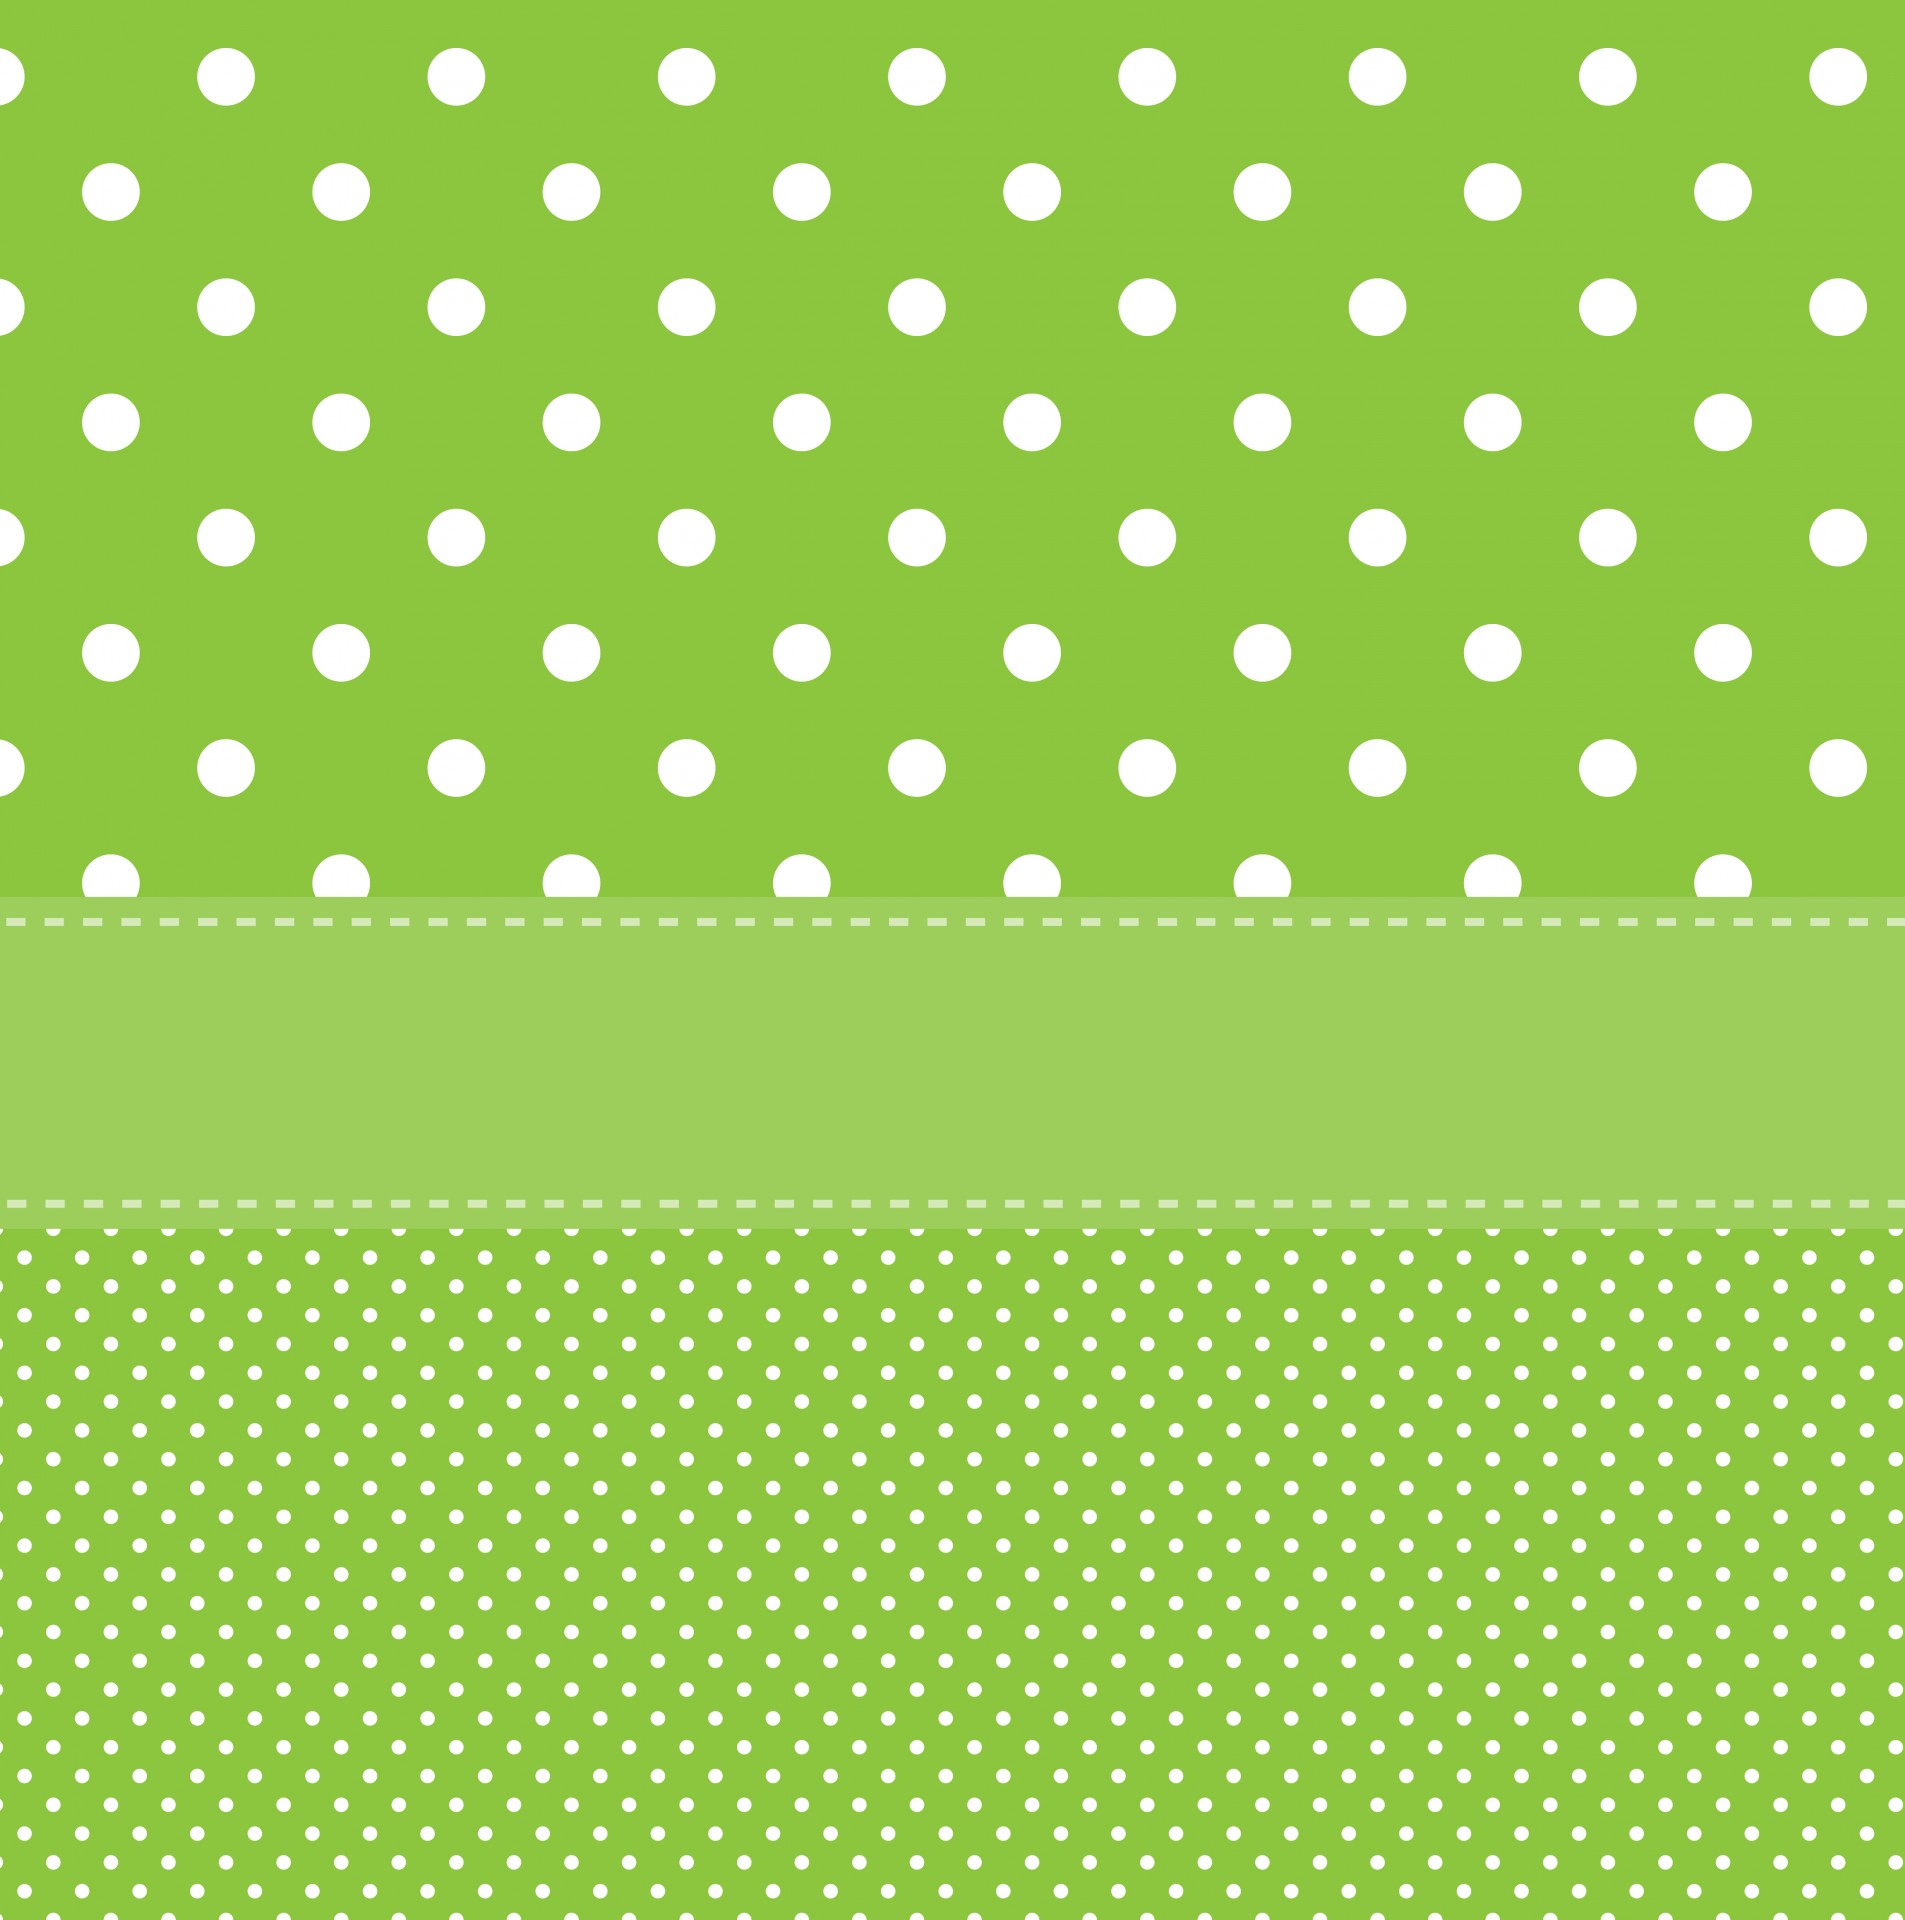 Beautiful green and white polka dots wallpaper background card template